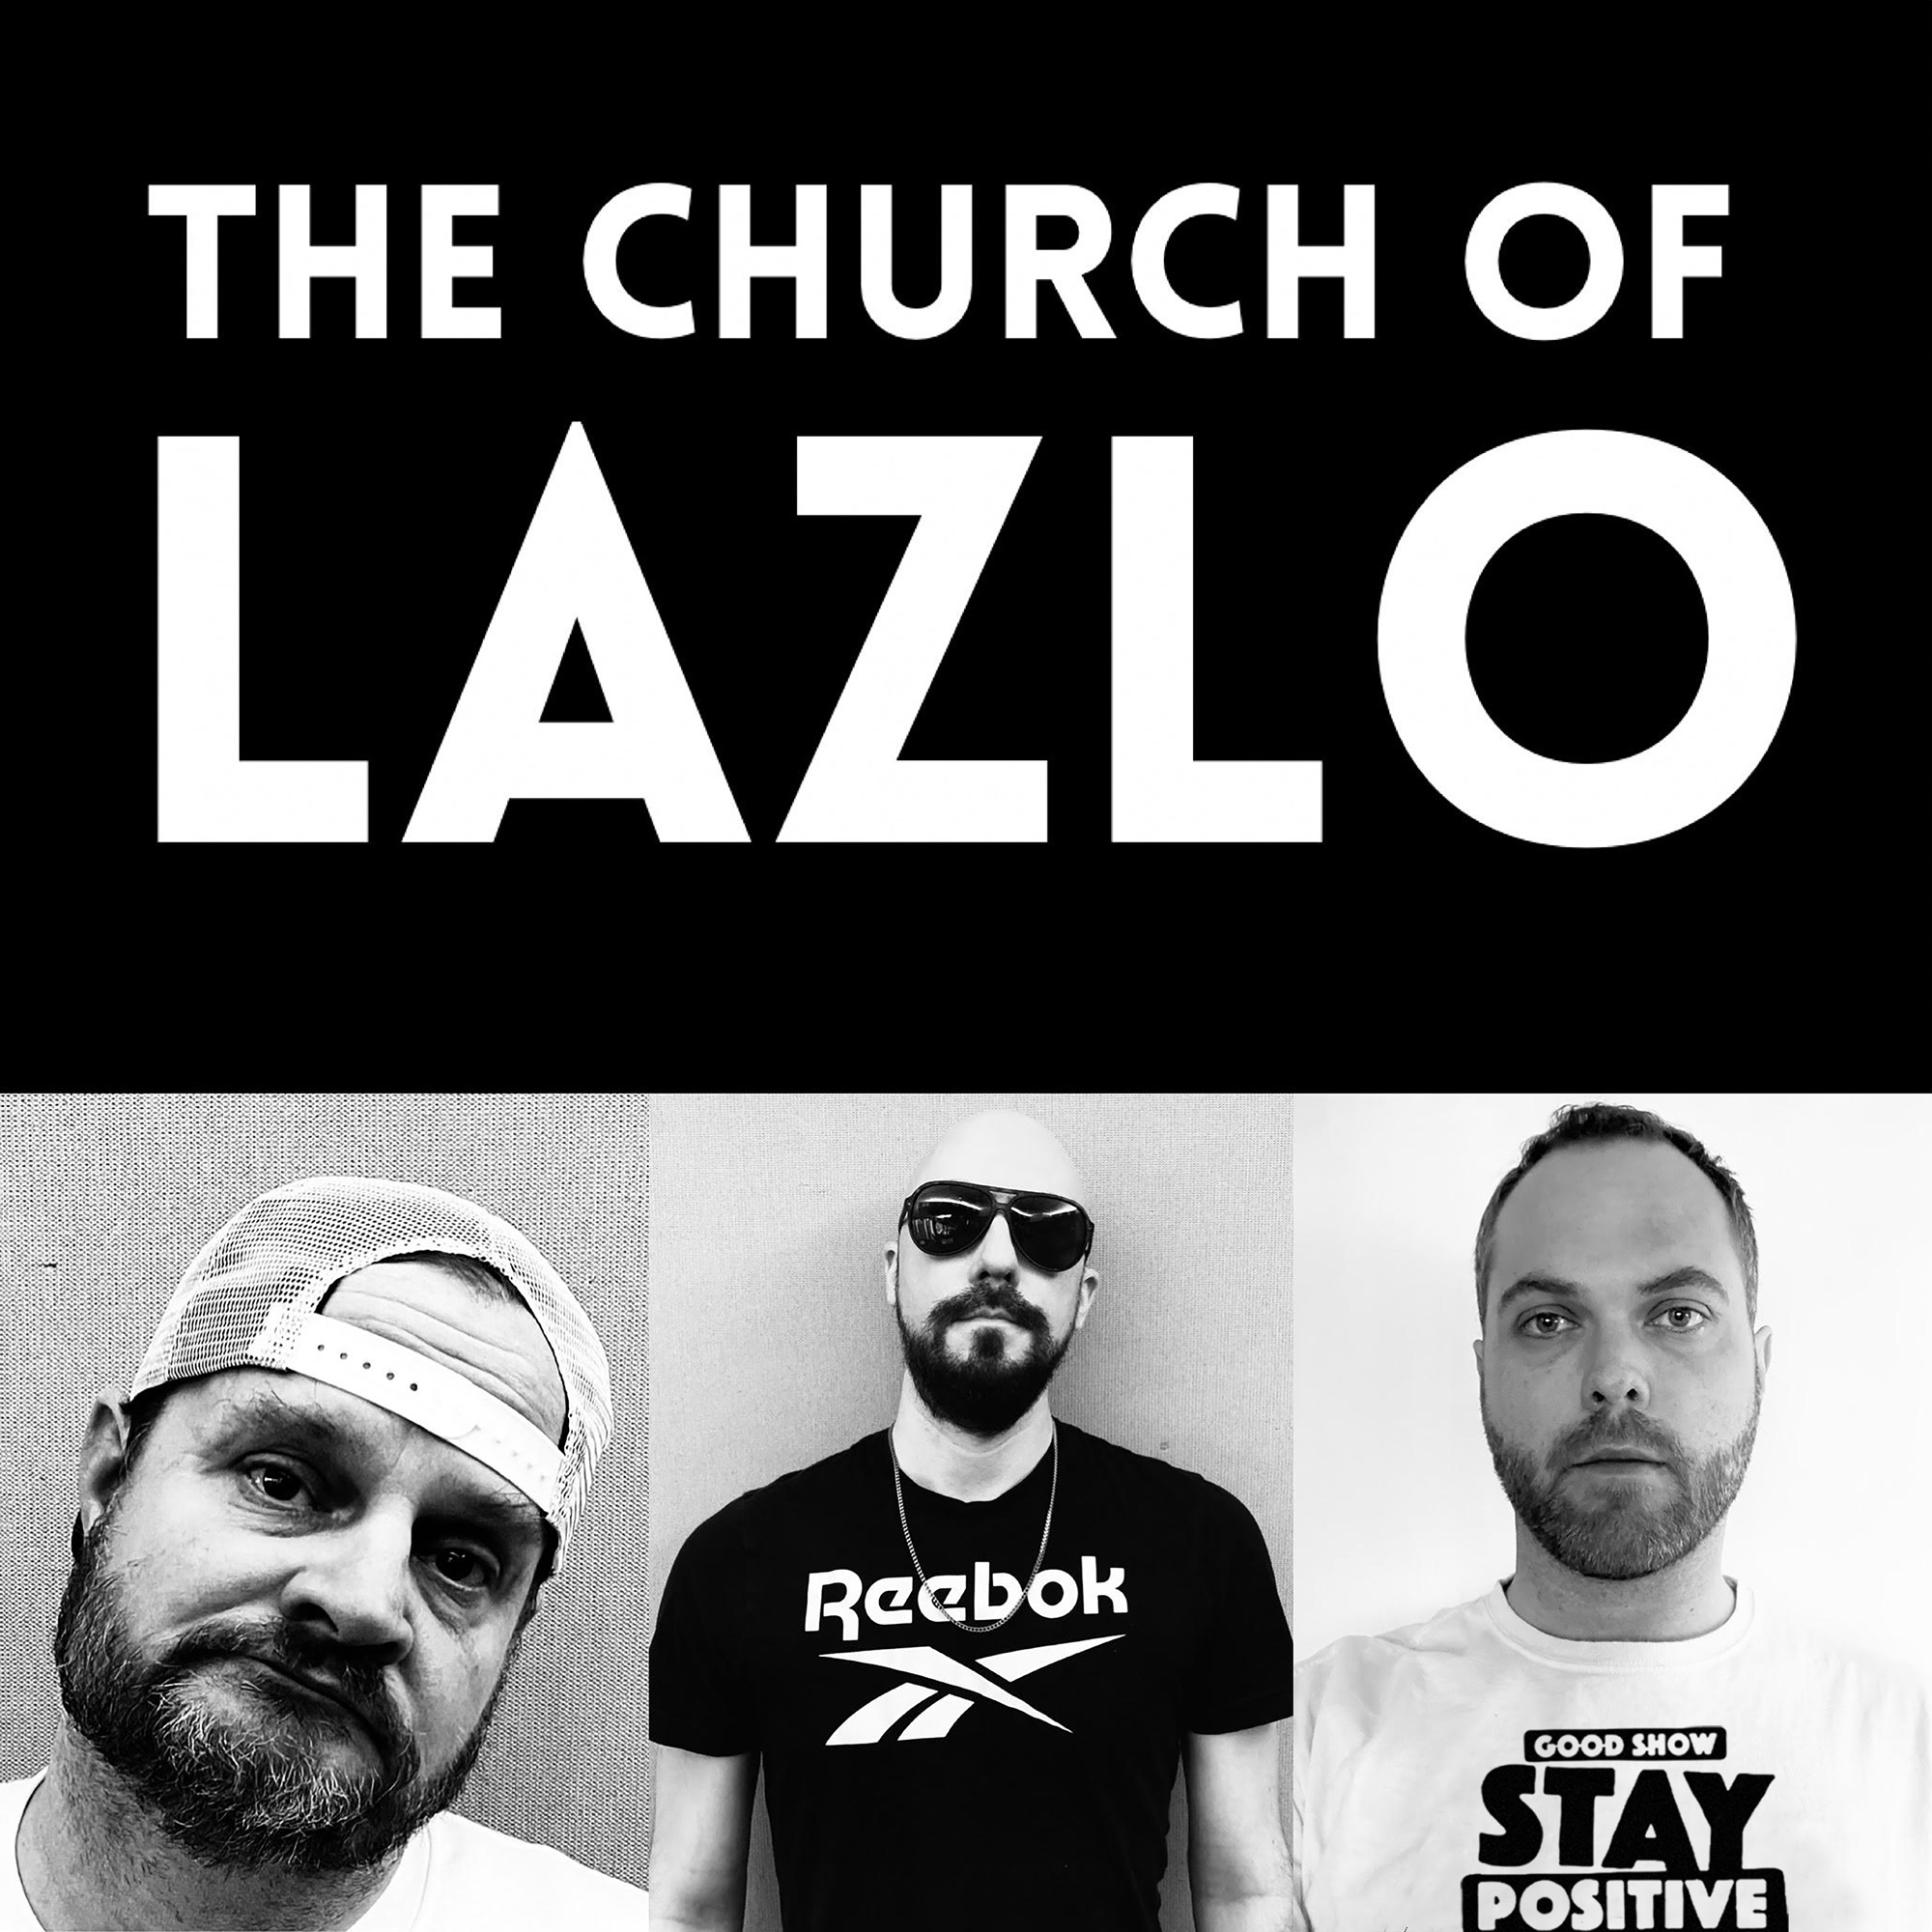 Wednesday, 11.18.2020- The Church of Lazlo Podcast